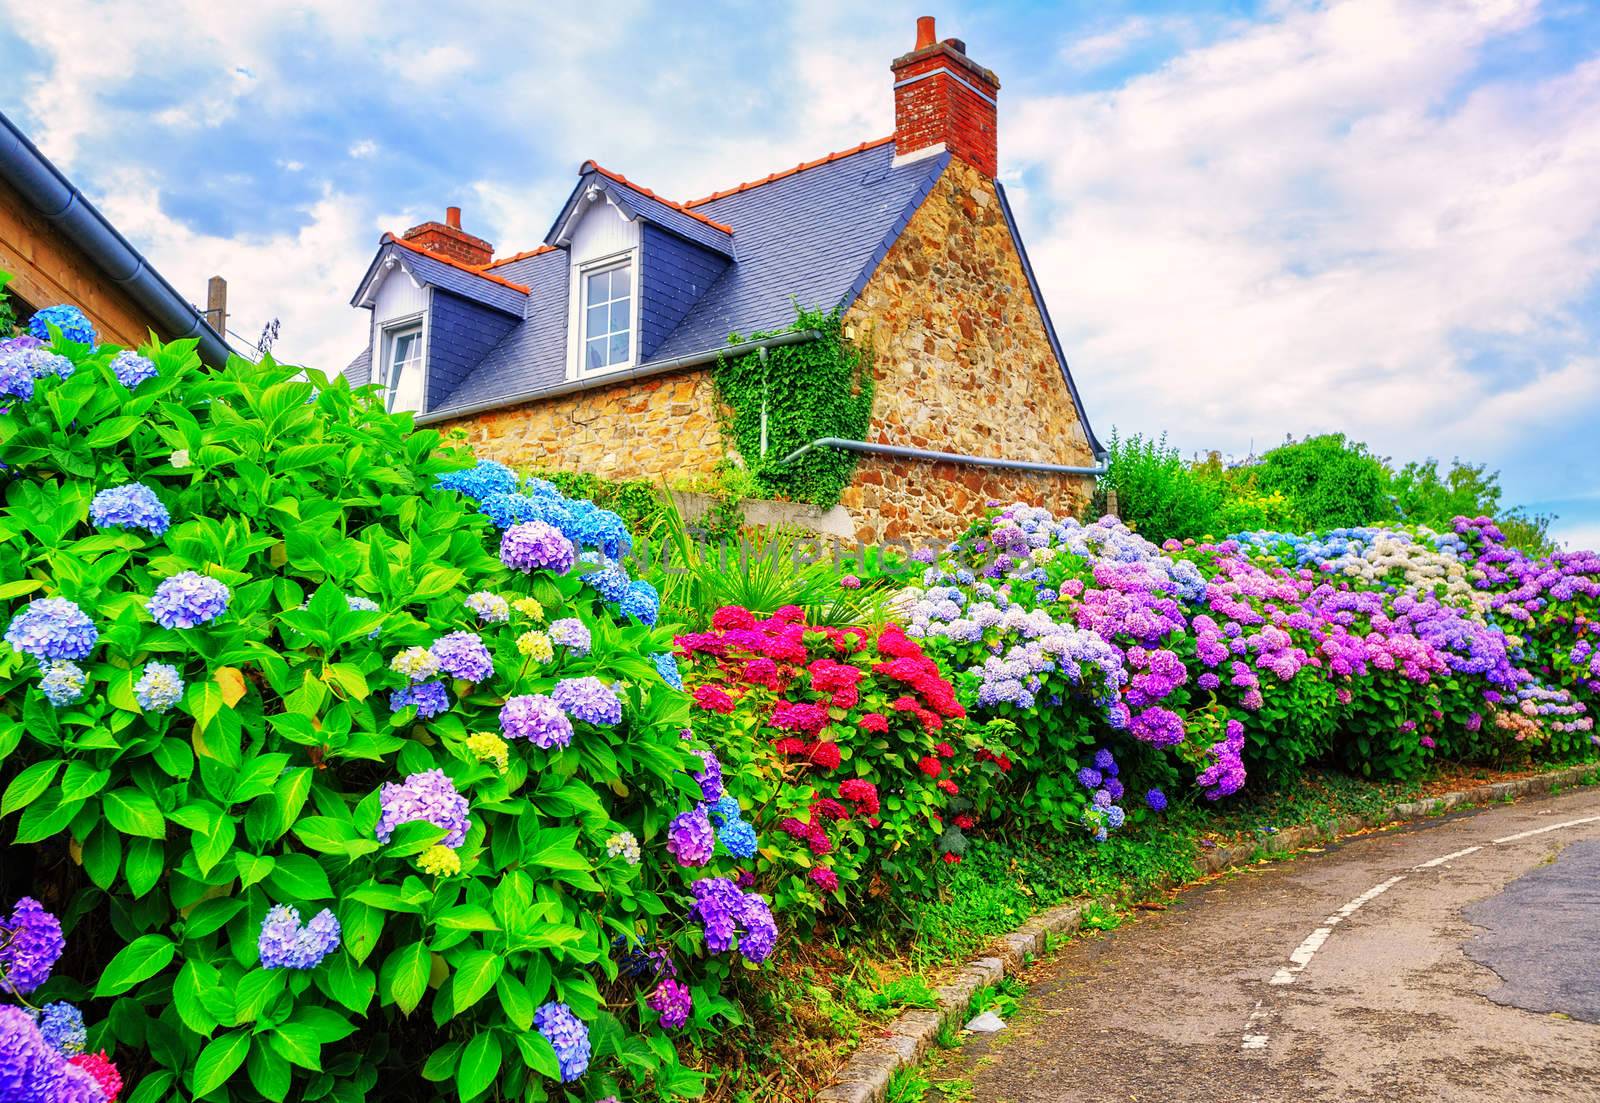 Colorful Hydrangeas flowers in a small village, Brittany, France by GlobePhotos